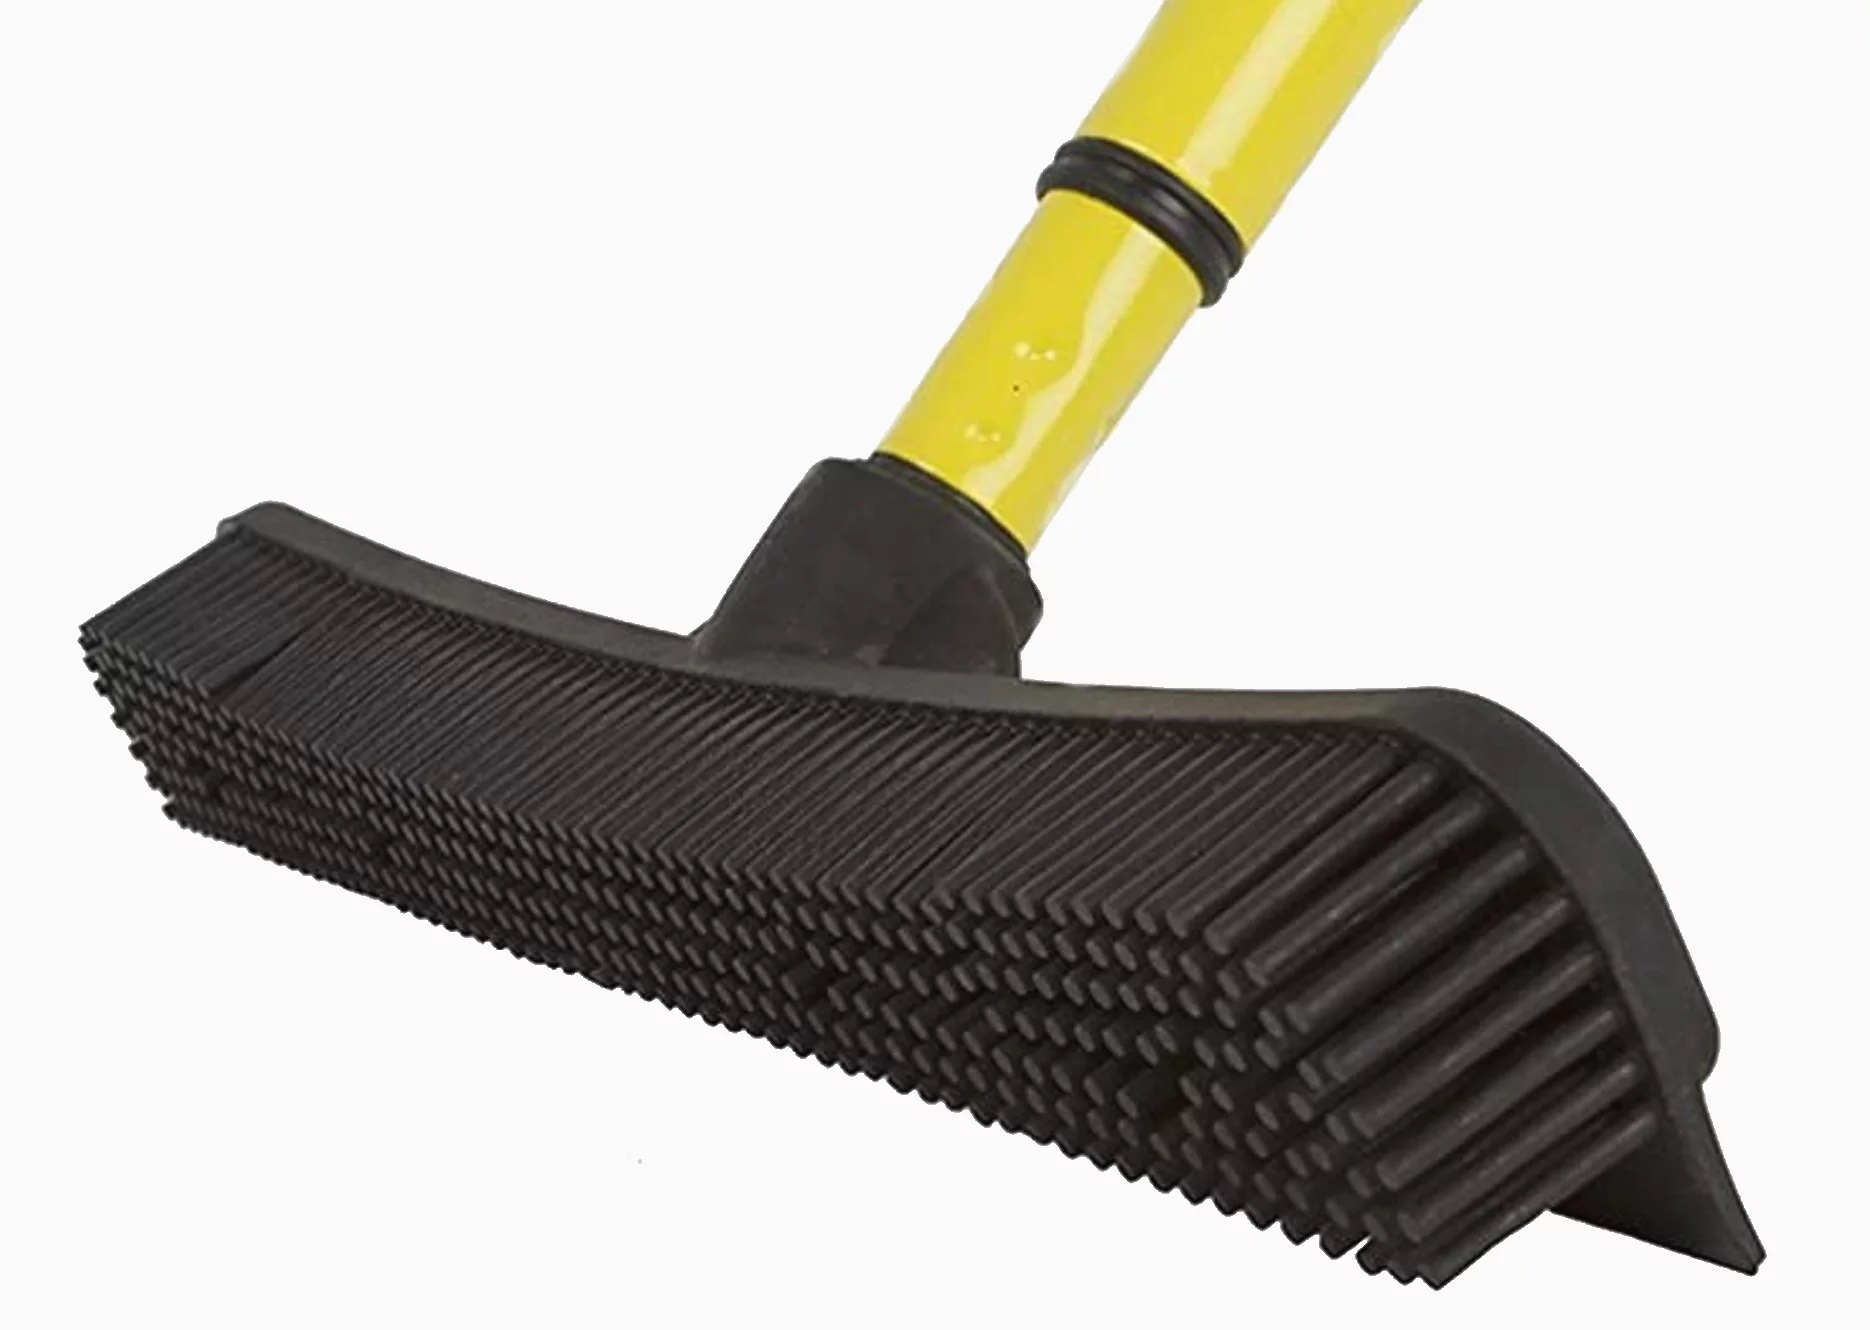 Where To Buy Rubber Broom